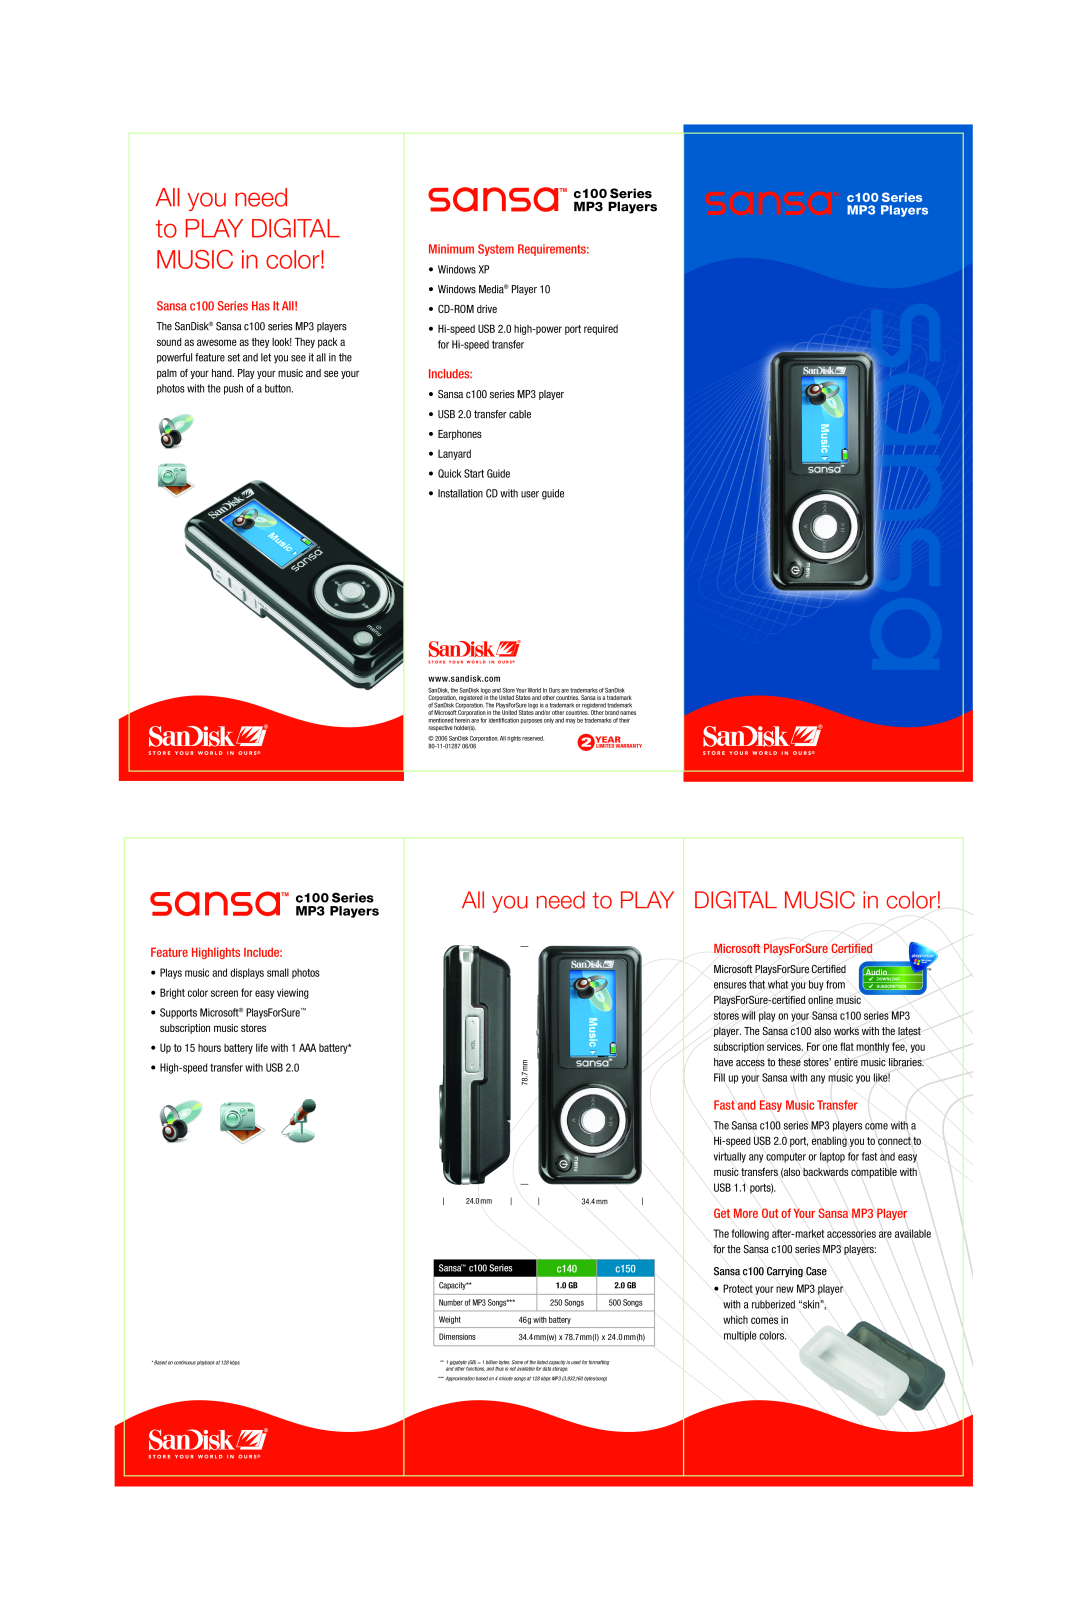 SanDisk 80-11-01287 dimensions to PLAY DIGITAL MUSIC in color, All you need to PLAY, Sansa c100 Series Has It All 